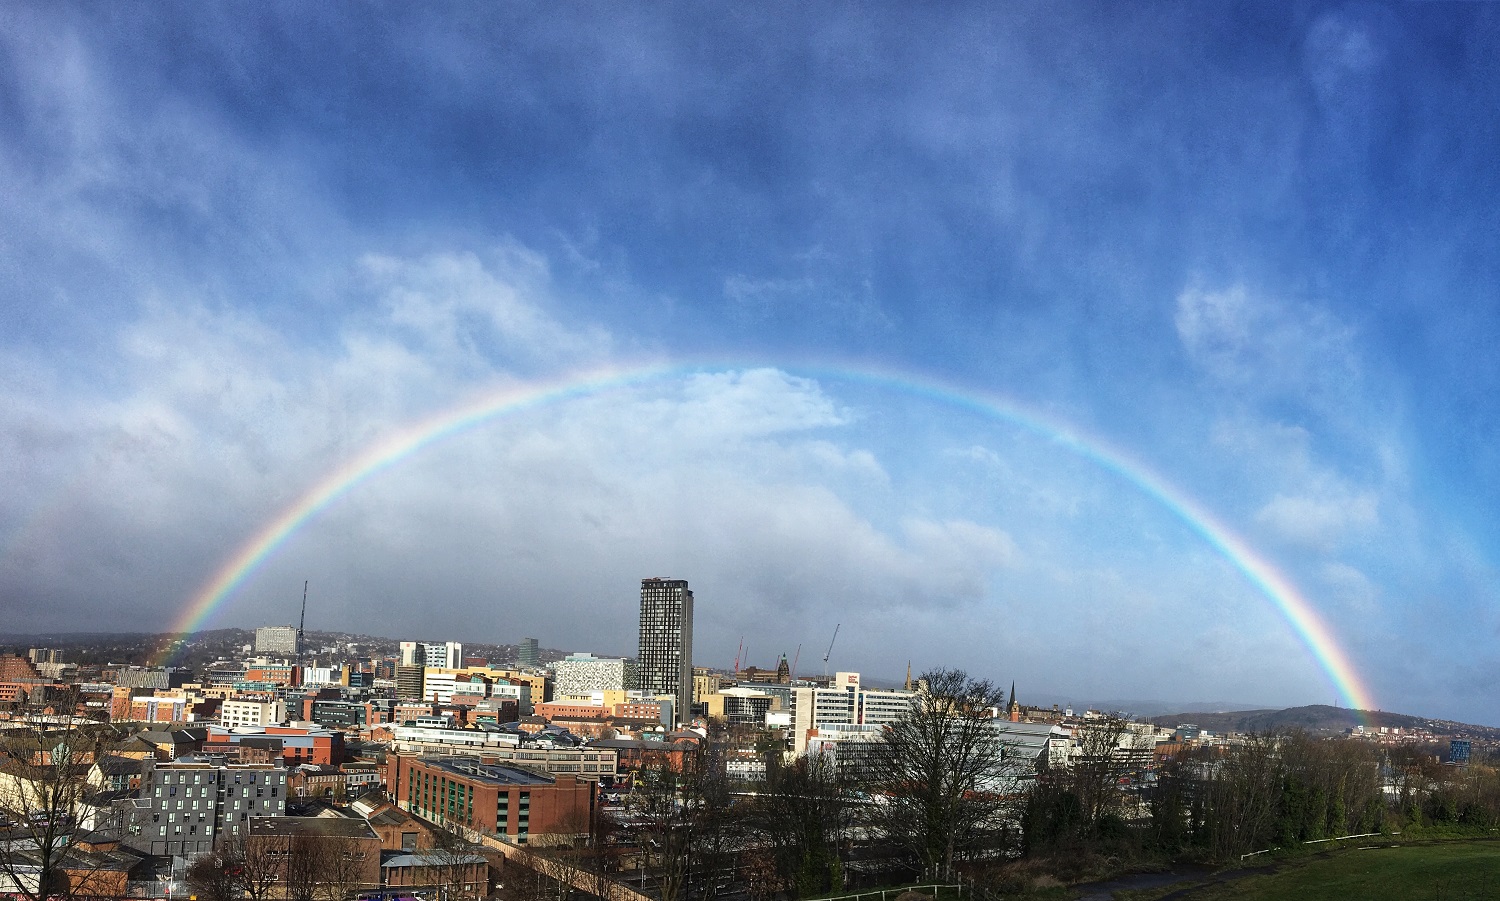 The view over Sheffield city centre